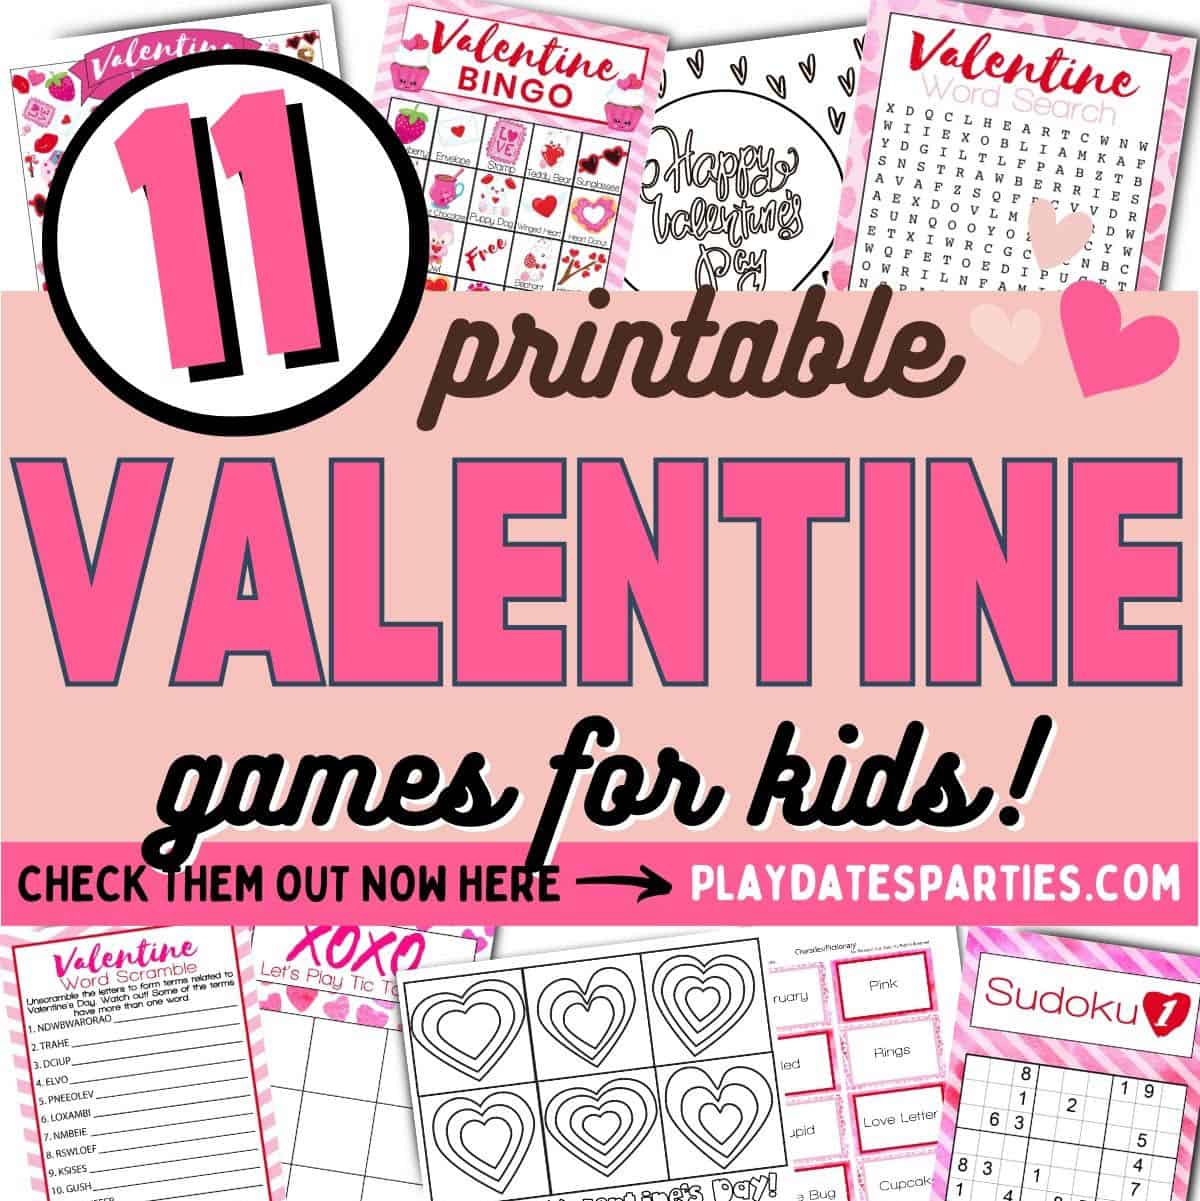 Printable Valentines Day Games.